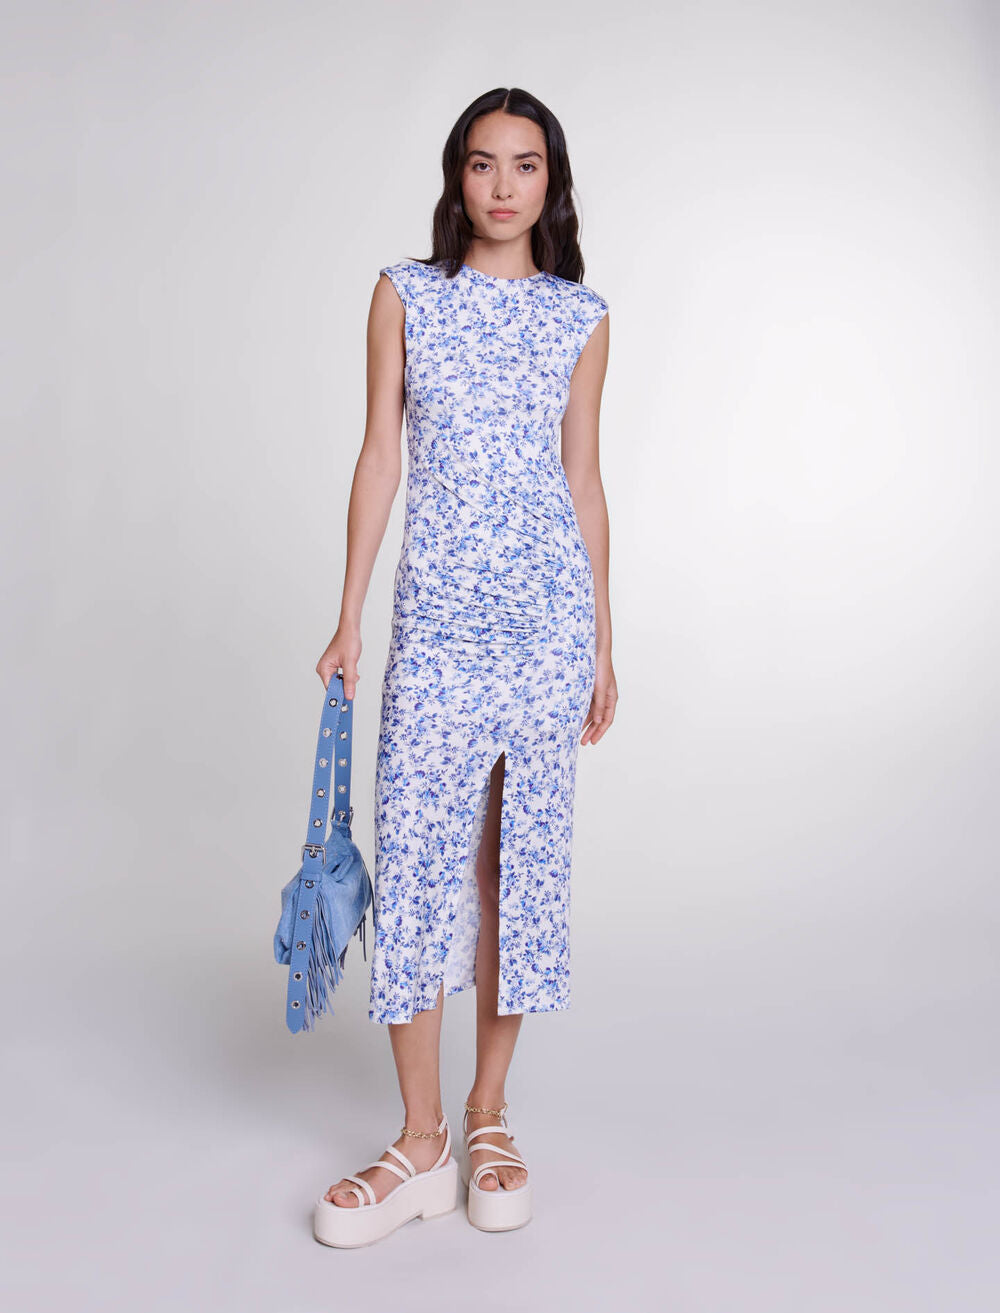 Small Blue Flower Print-featured-Patterned maxi dress